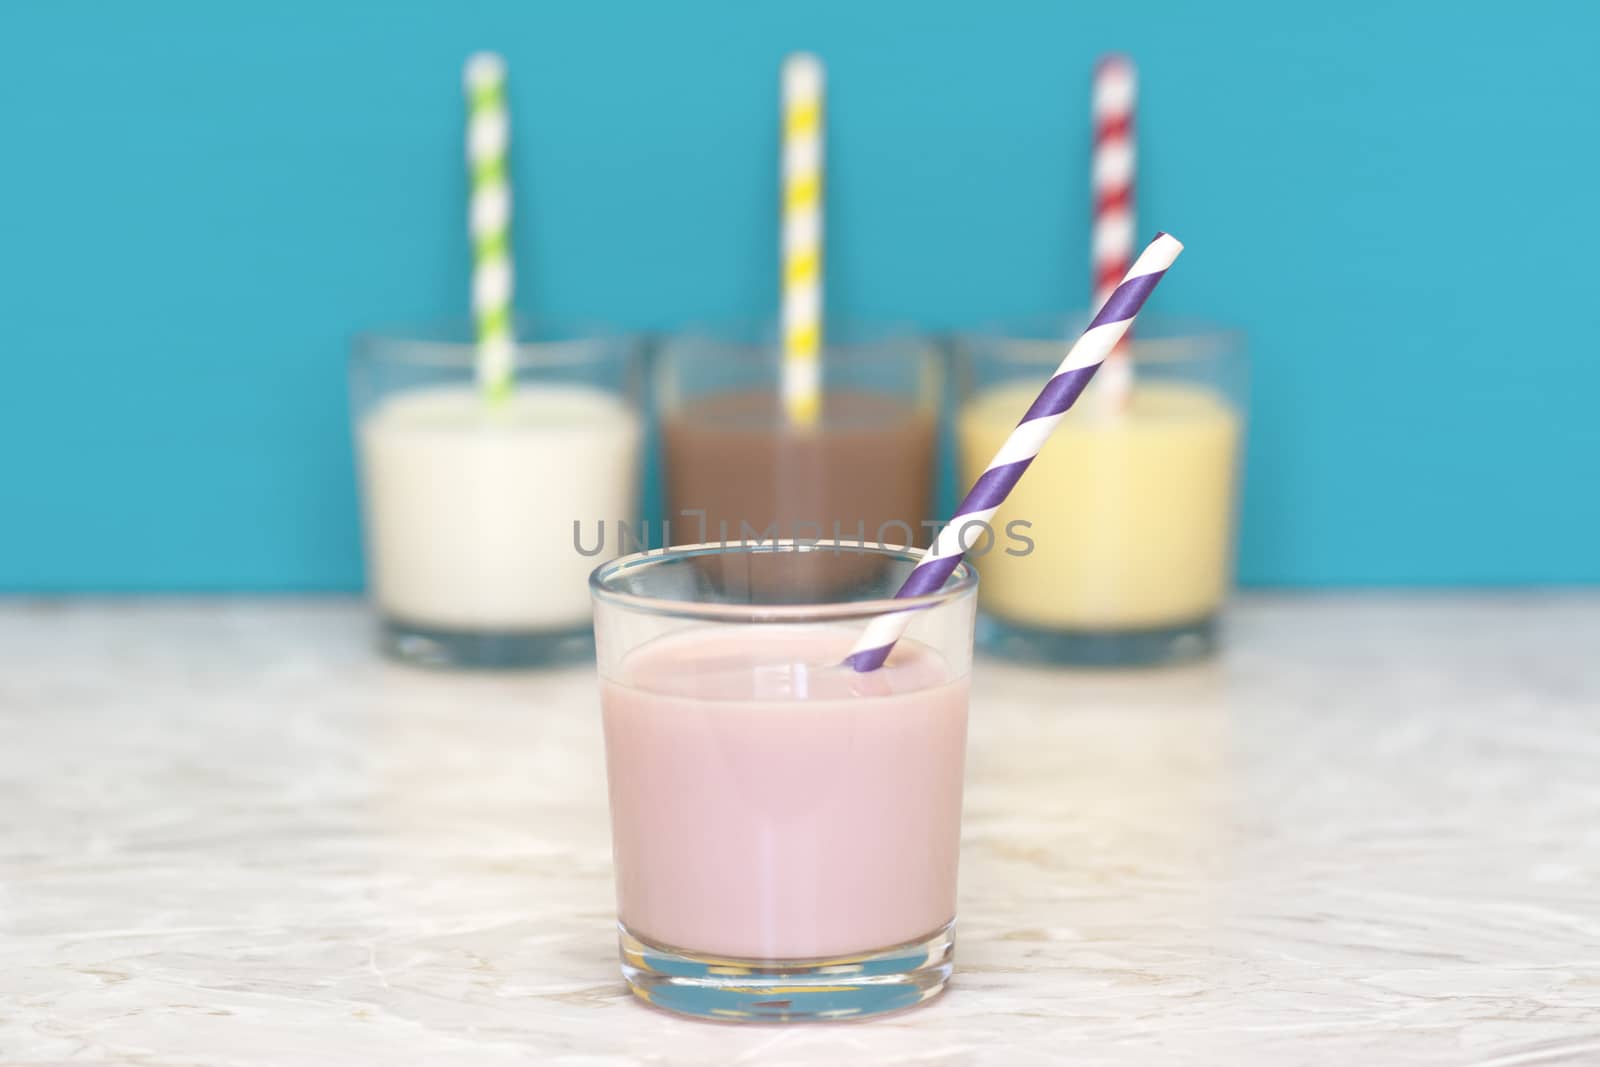 Strawberry milkshake with a retro paper straw in front of a row of fresh milk and flavoured milkshakes against a teal background